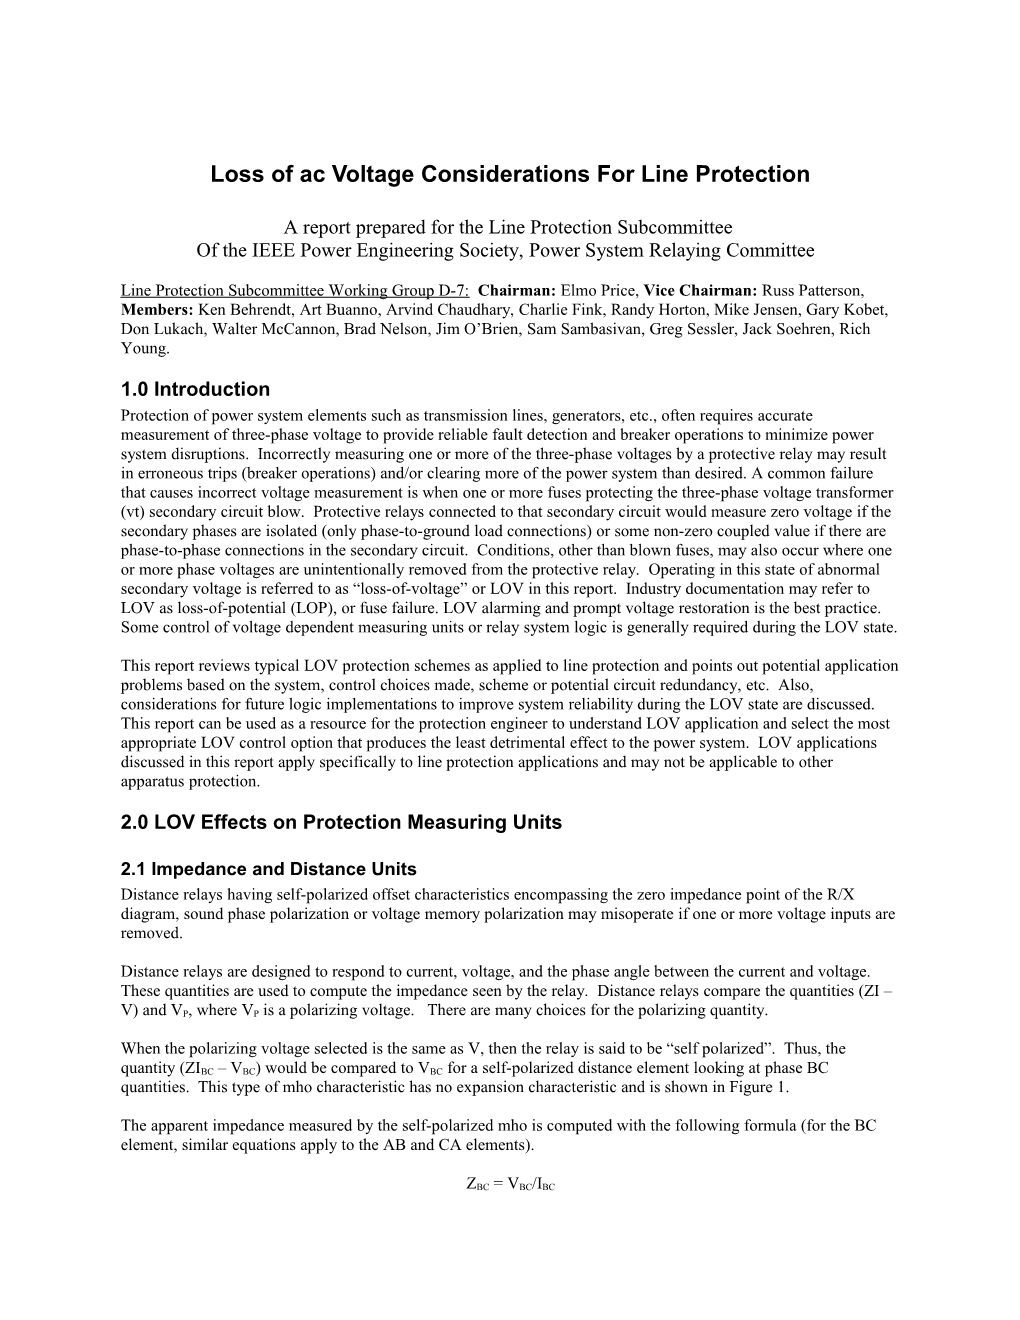 Loss of AC Voltage Considerations